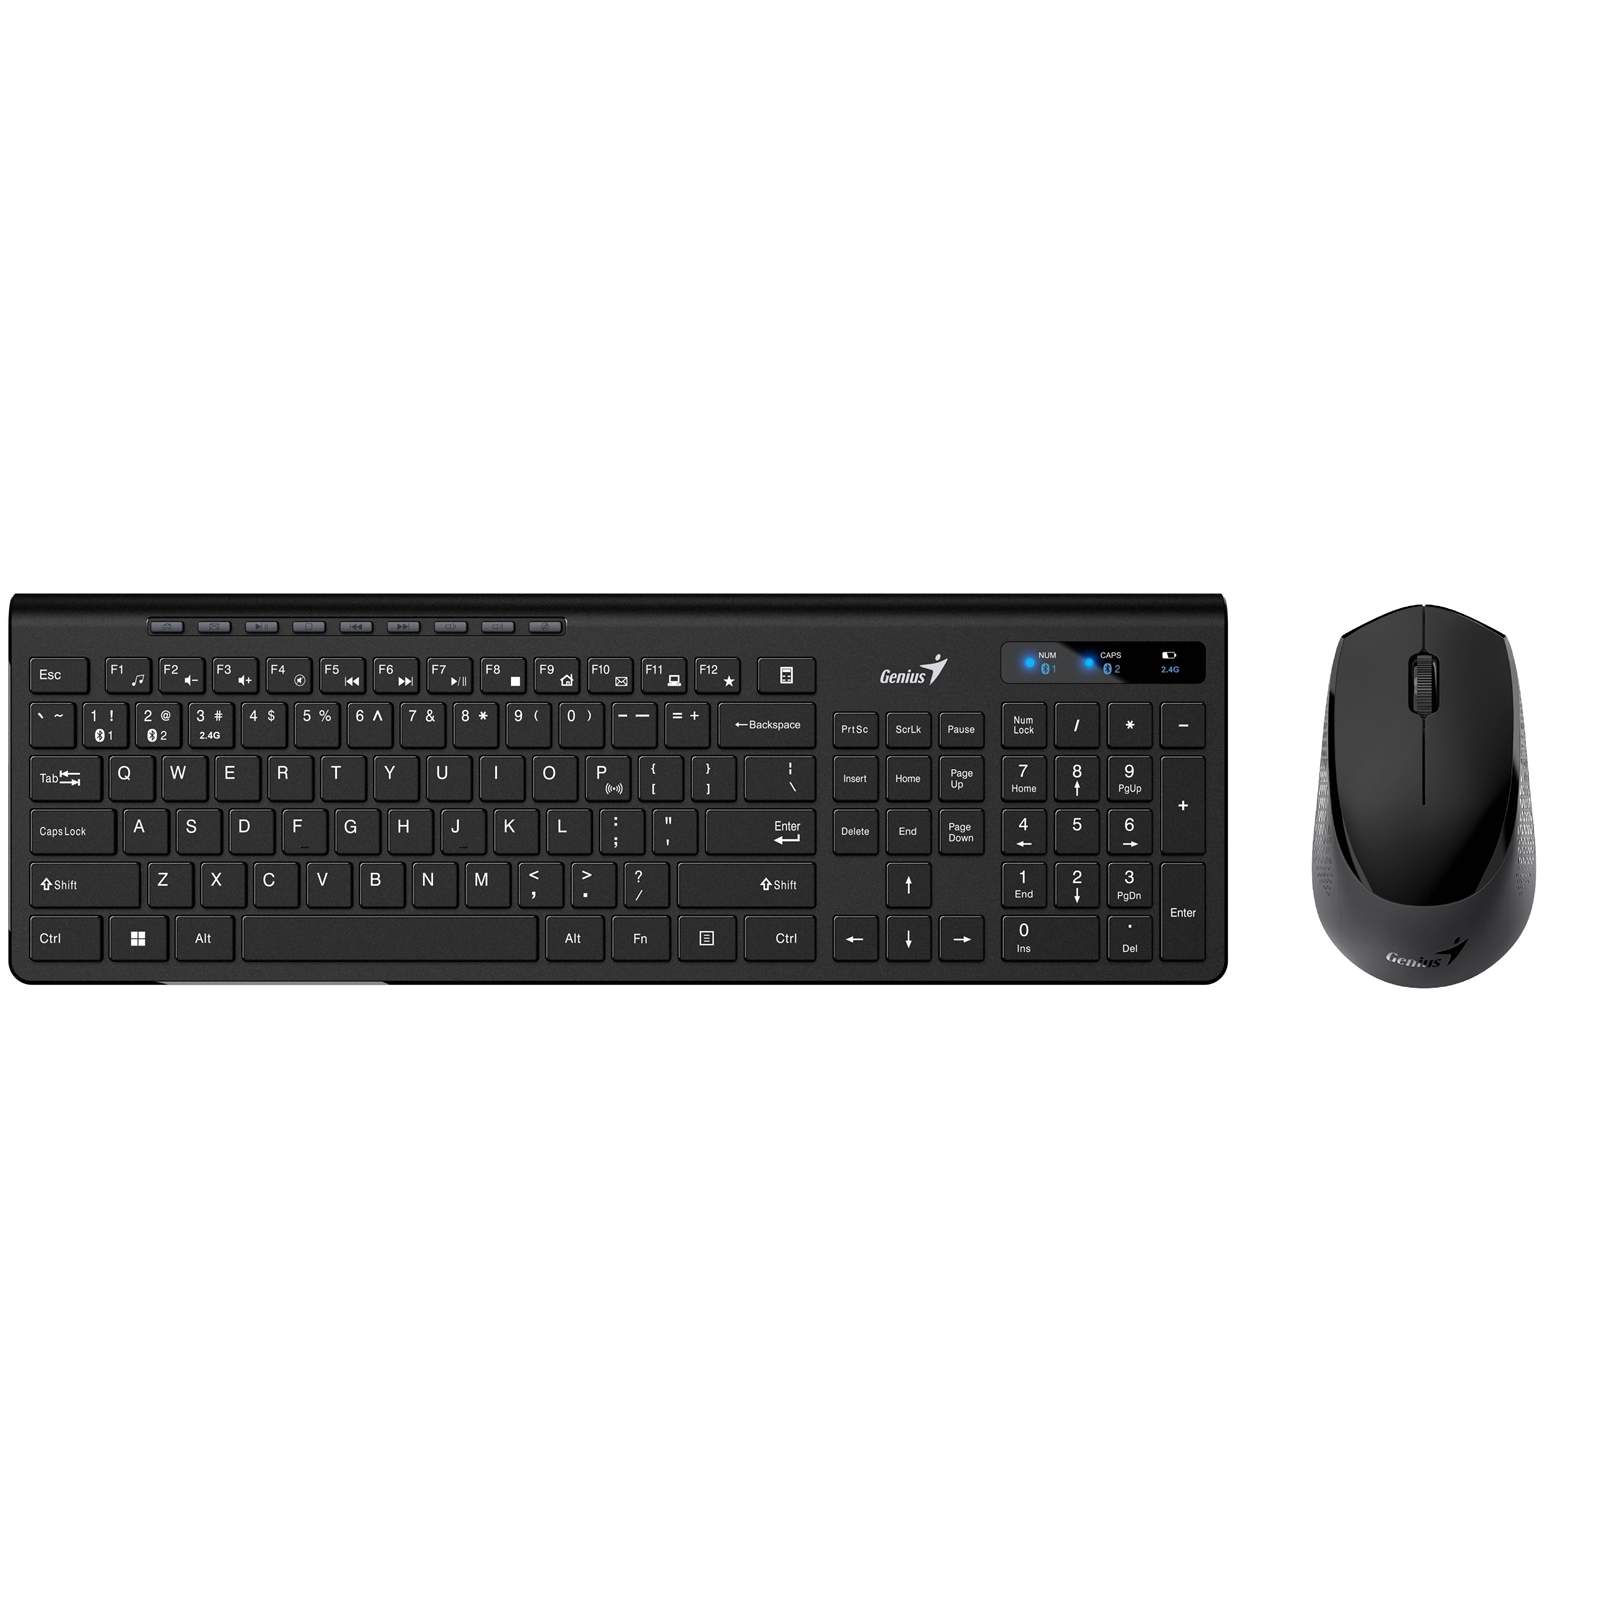 Genius SlimStar 8230 Bluetooth 5.3 and 2.4GHz Wireless Keyboard and Mouse Set, 12 Multimedia Function Keys, Full Size UK Layout, Optical Sensor Mouse, 1200dpi, Connect up to 3 devices simultaneously